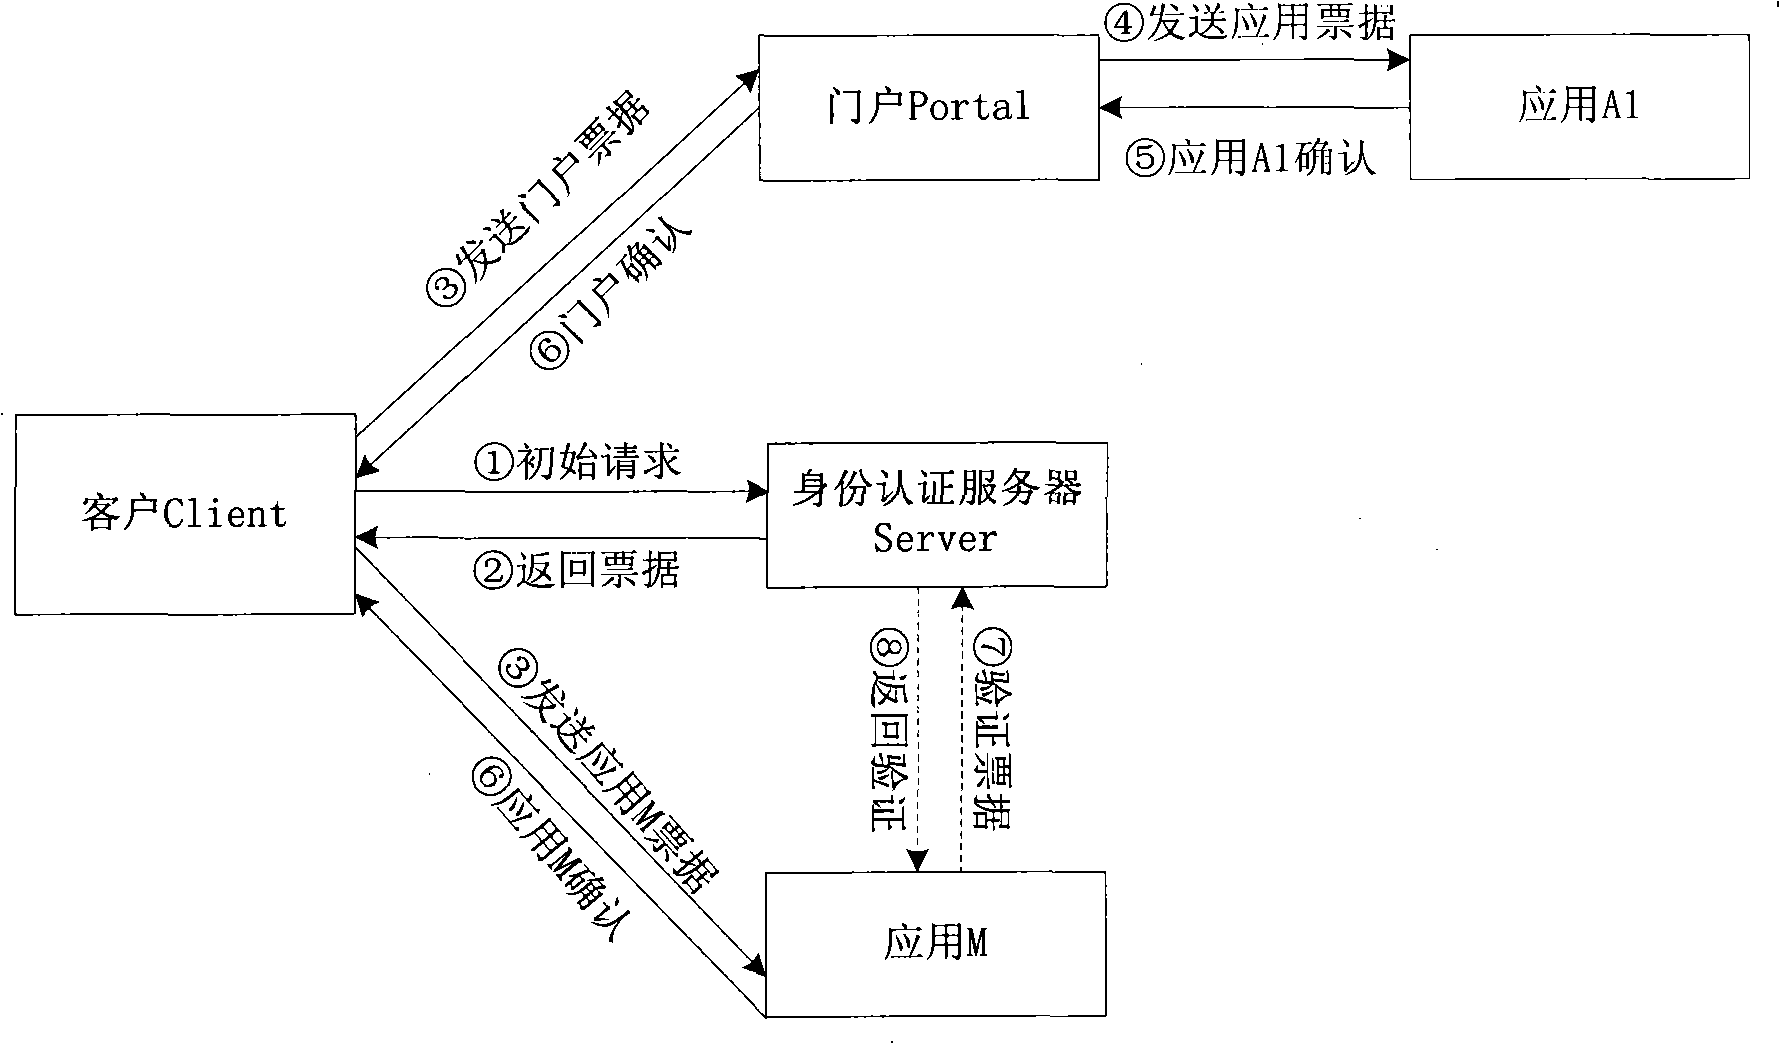 Single-point login method under point-to-point model